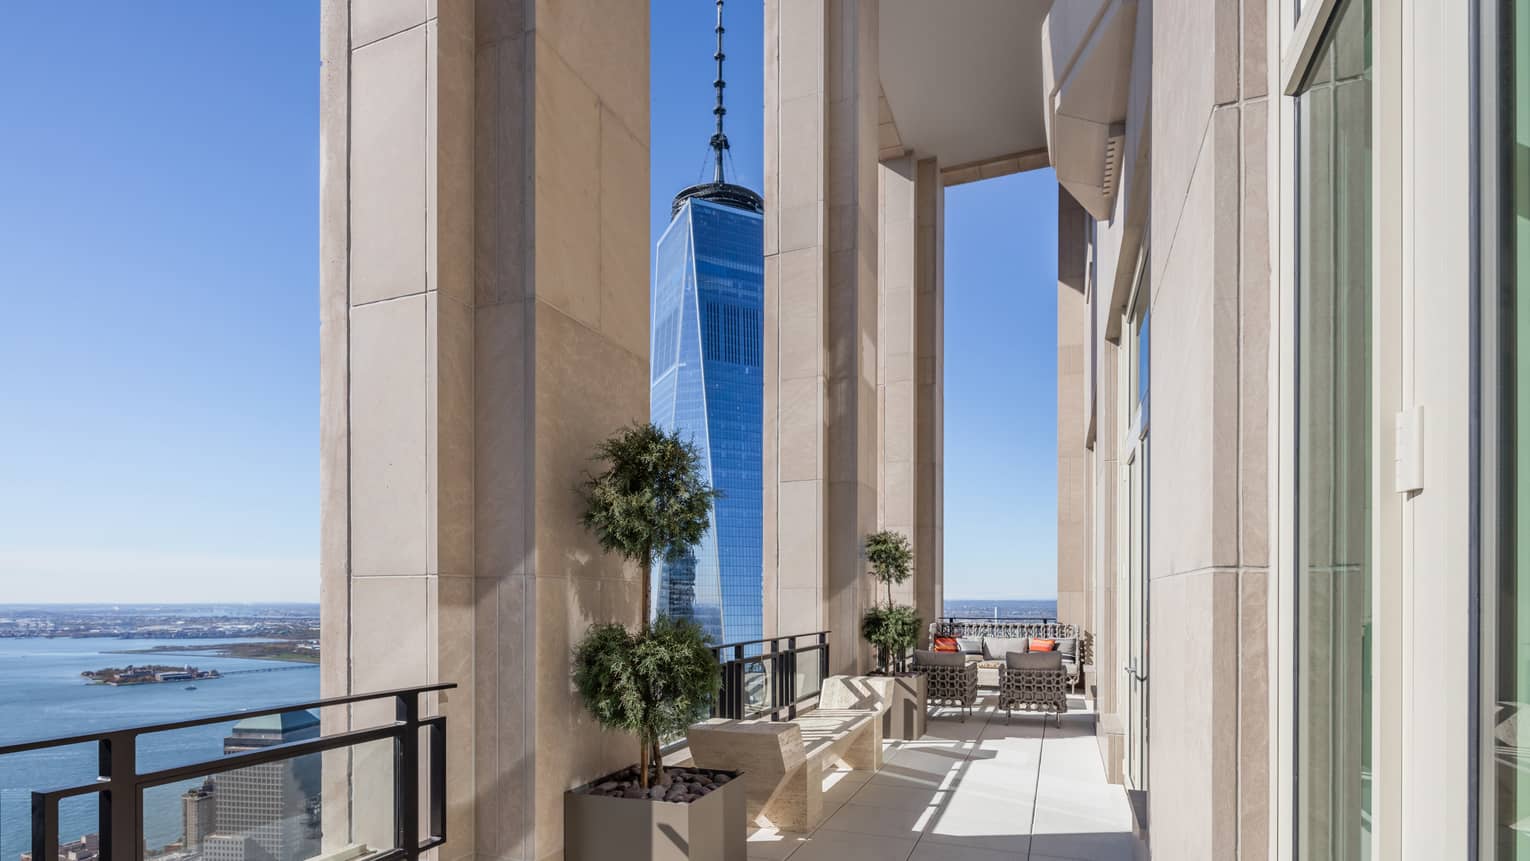 Private penthouse terrace with bench, seating area under soaring stone pillars, Hudson River views